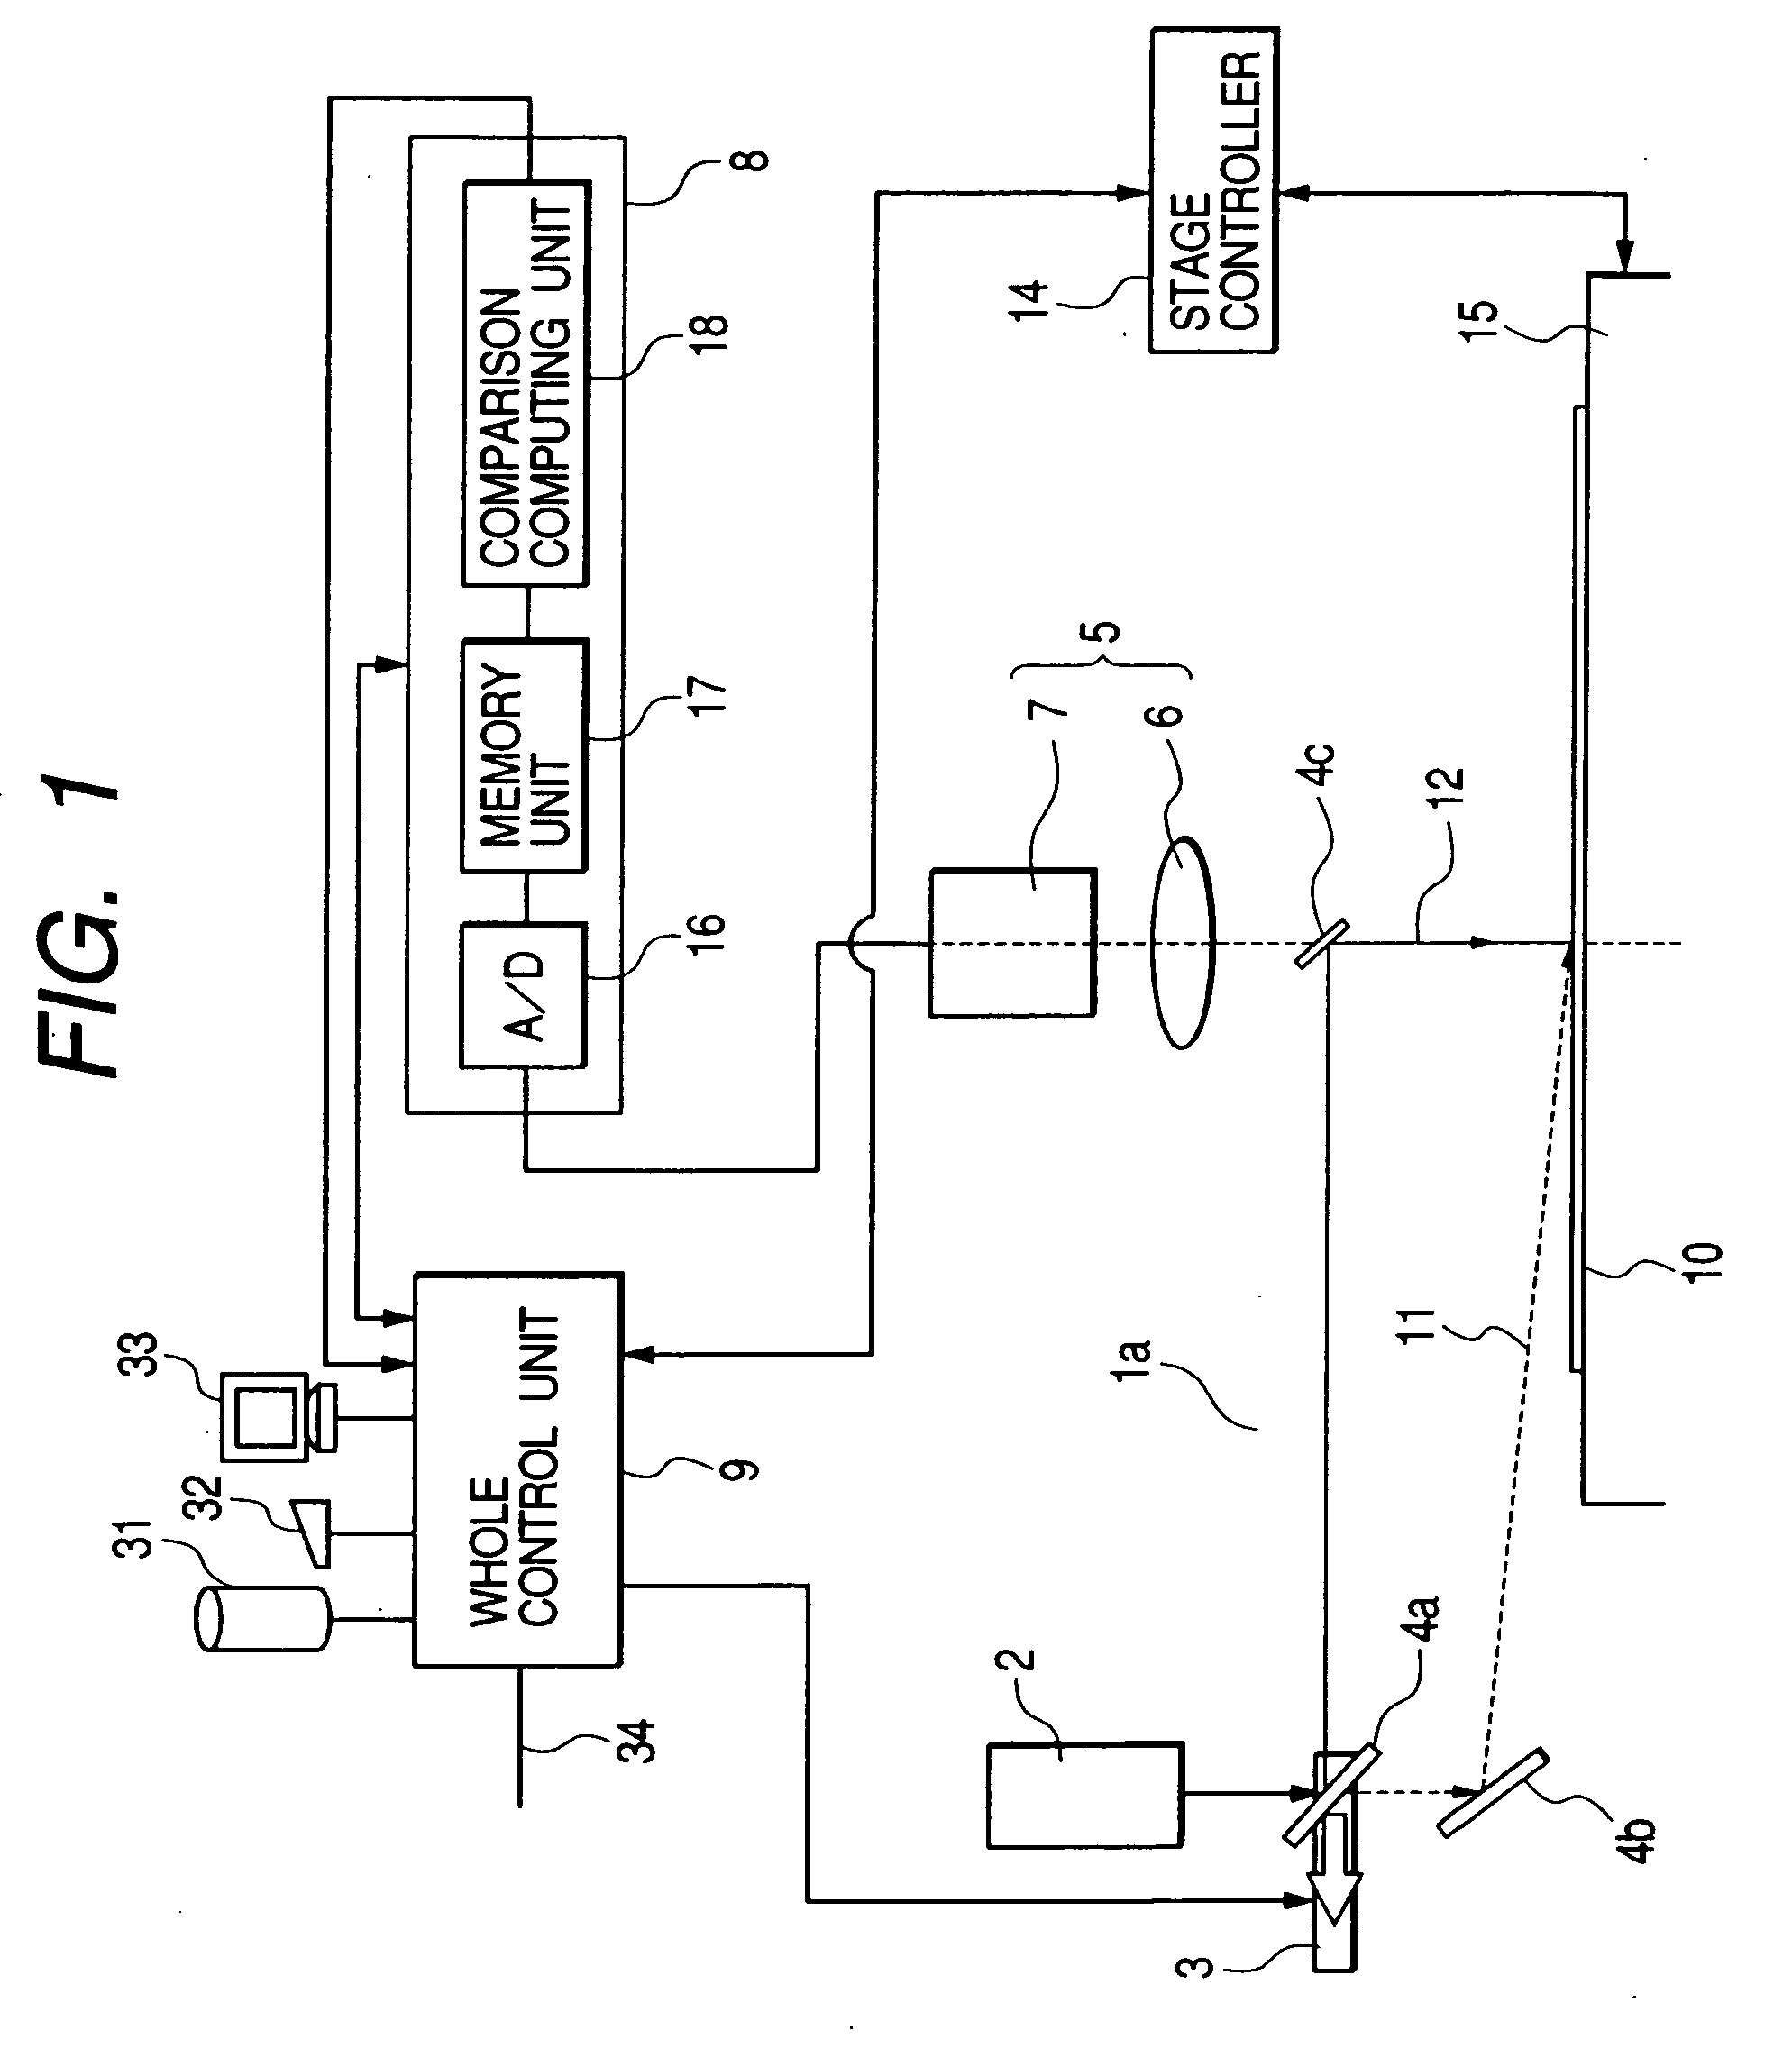 Surface inspection apparatus and method thereof